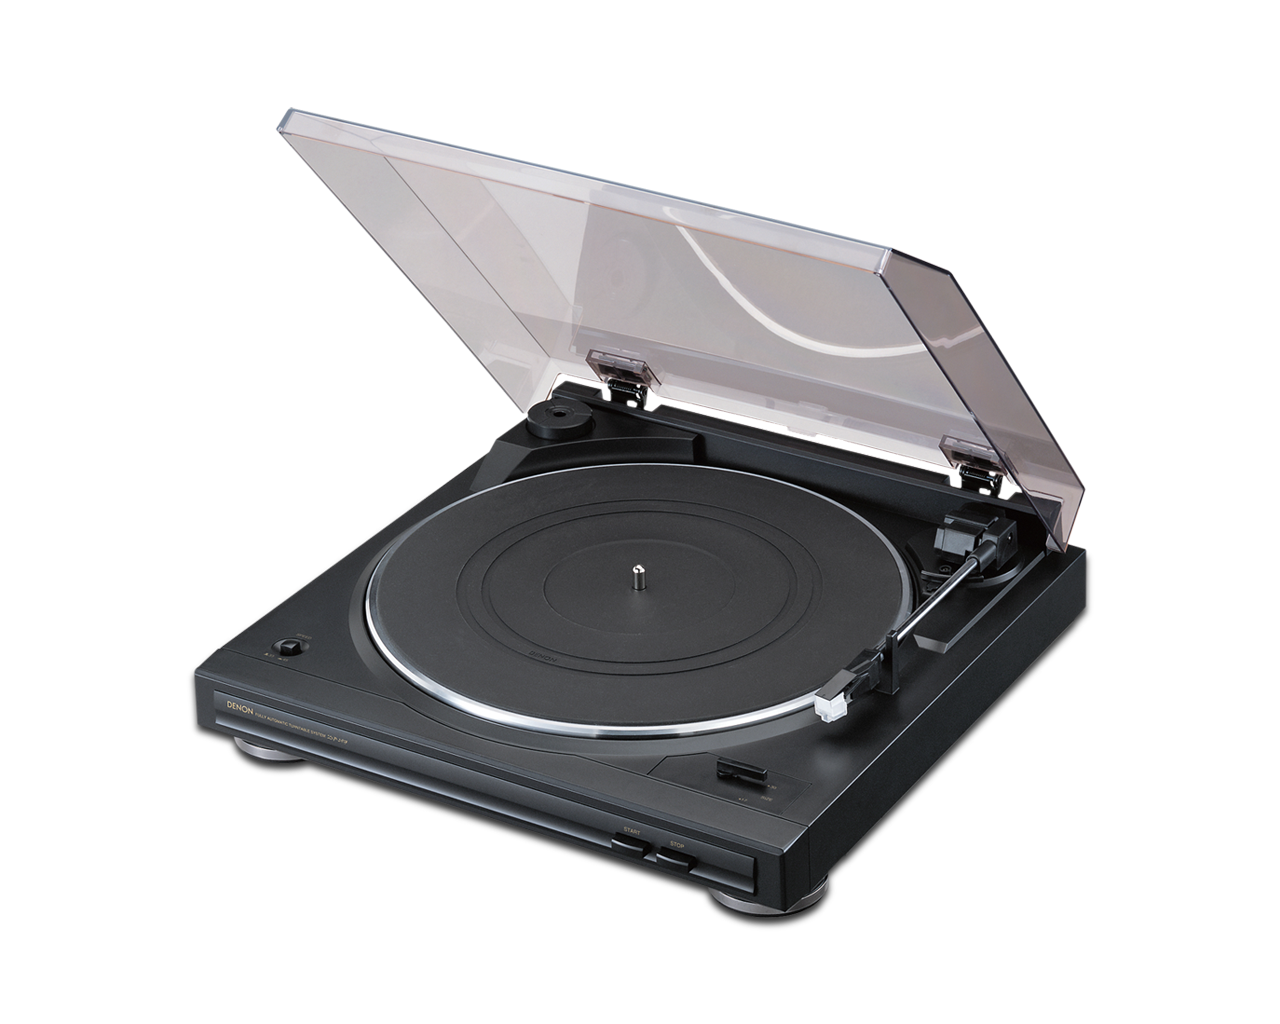 Denon Dp 29f Analog Turntable The Guitar Store